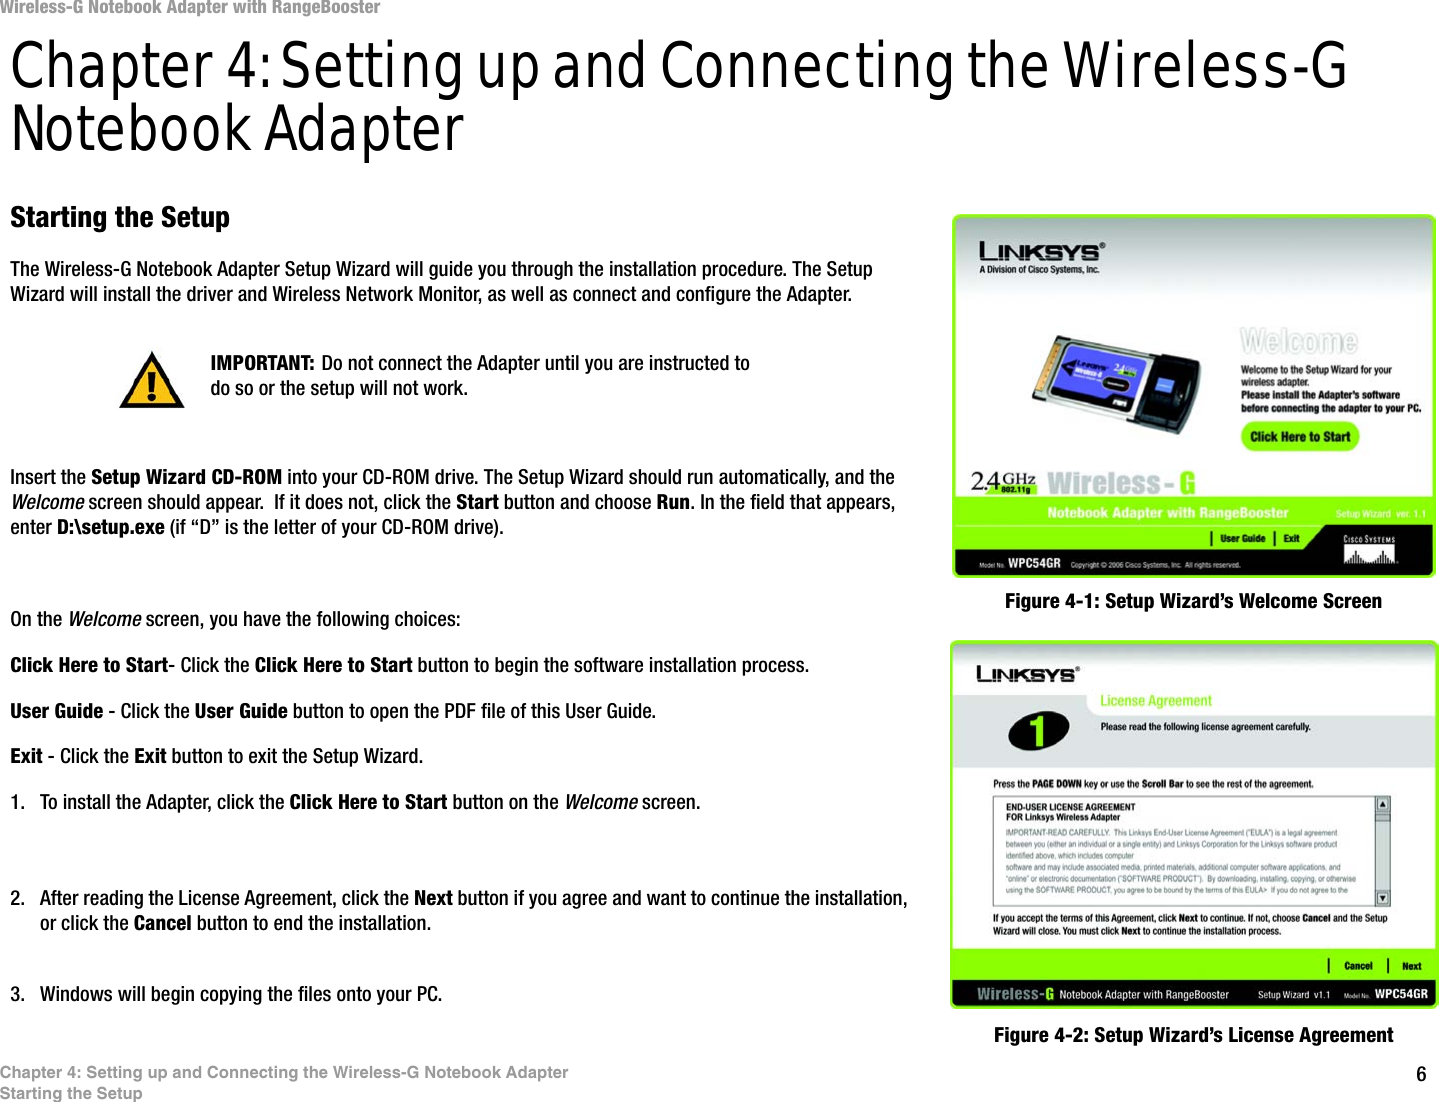 6Chapter 4: Setting up and Connecting the Wireless-G Notebook AdapterStarting the SetupWireless-G Notebook Adapter with RangeBoosterChapter 4: Setting up and Connecting the Wireless-G Notebook AdapterStarting the SetupThe Wireless-G Notebook Adapter Setup Wizard will guide you through the installation procedure. The Setup Wizard will install the driver and Wireless Network Monitor, as well as connect and configure the Adapter.Insert the Setup Wizard CD-ROM into your CD-ROM drive. The Setup Wizard should run automatically, and the Welcome screen should appear.  If it does not, click the Start button and choose Run. In the field that appears, enter D:\setup.exe (if “D” is the letter of your CD-ROM drive). On the Welcome screen, you have the following choices:Click Here to Start- Click the Click Here to Start button to begin the software installation process. User Guide - Click the User Guide button to open the PDF file of this User Guide. Exit - Click the Exit button to exit the Setup Wizard.1. To install the Adapter, click the Click Here to Start button on the Welcome screen.2. After reading the License Agreement, click the Next button if you agree and want to continue the installation, or click the Cancel button to end the installation.3. Windows will begin copying the files onto your PC. Figure 4-1: Setup Wizard’s Welcome ScreenFigure 4-2: Setup Wizard’s License AgreementIMPORTANT: Do not connect the Adapter until you are instructed to do so or the setup will not work.